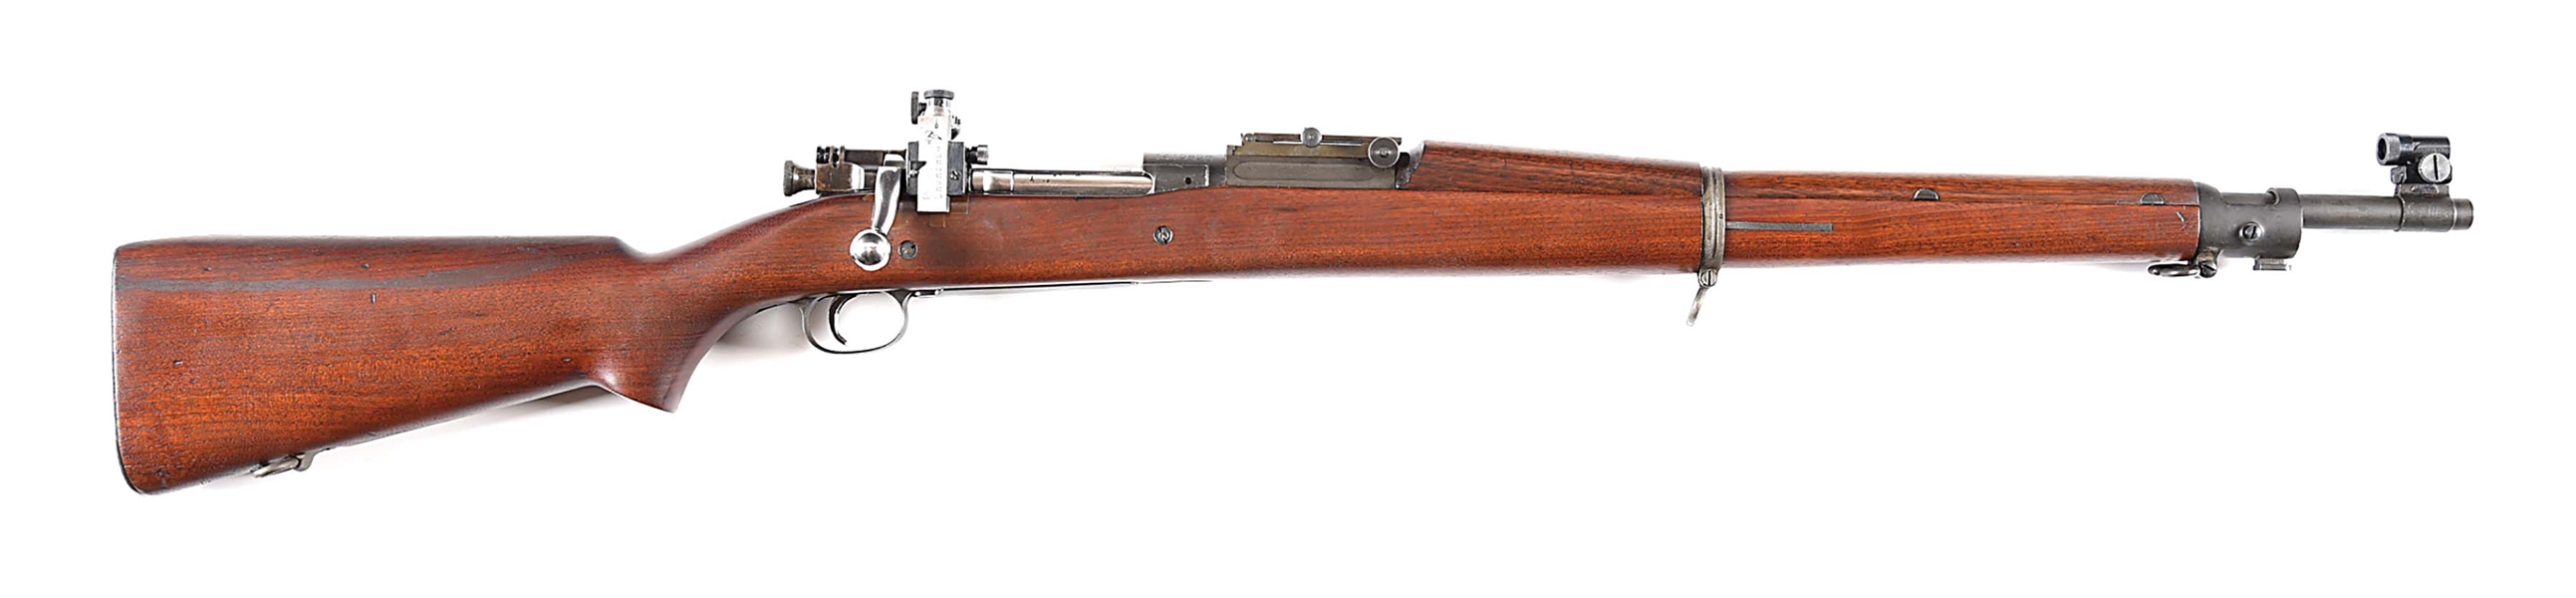 (C) SPRINFIELD MODEL 1903A1 NATIONAL MATCH CONFIGURATION BOLT ACTION RIFLE.